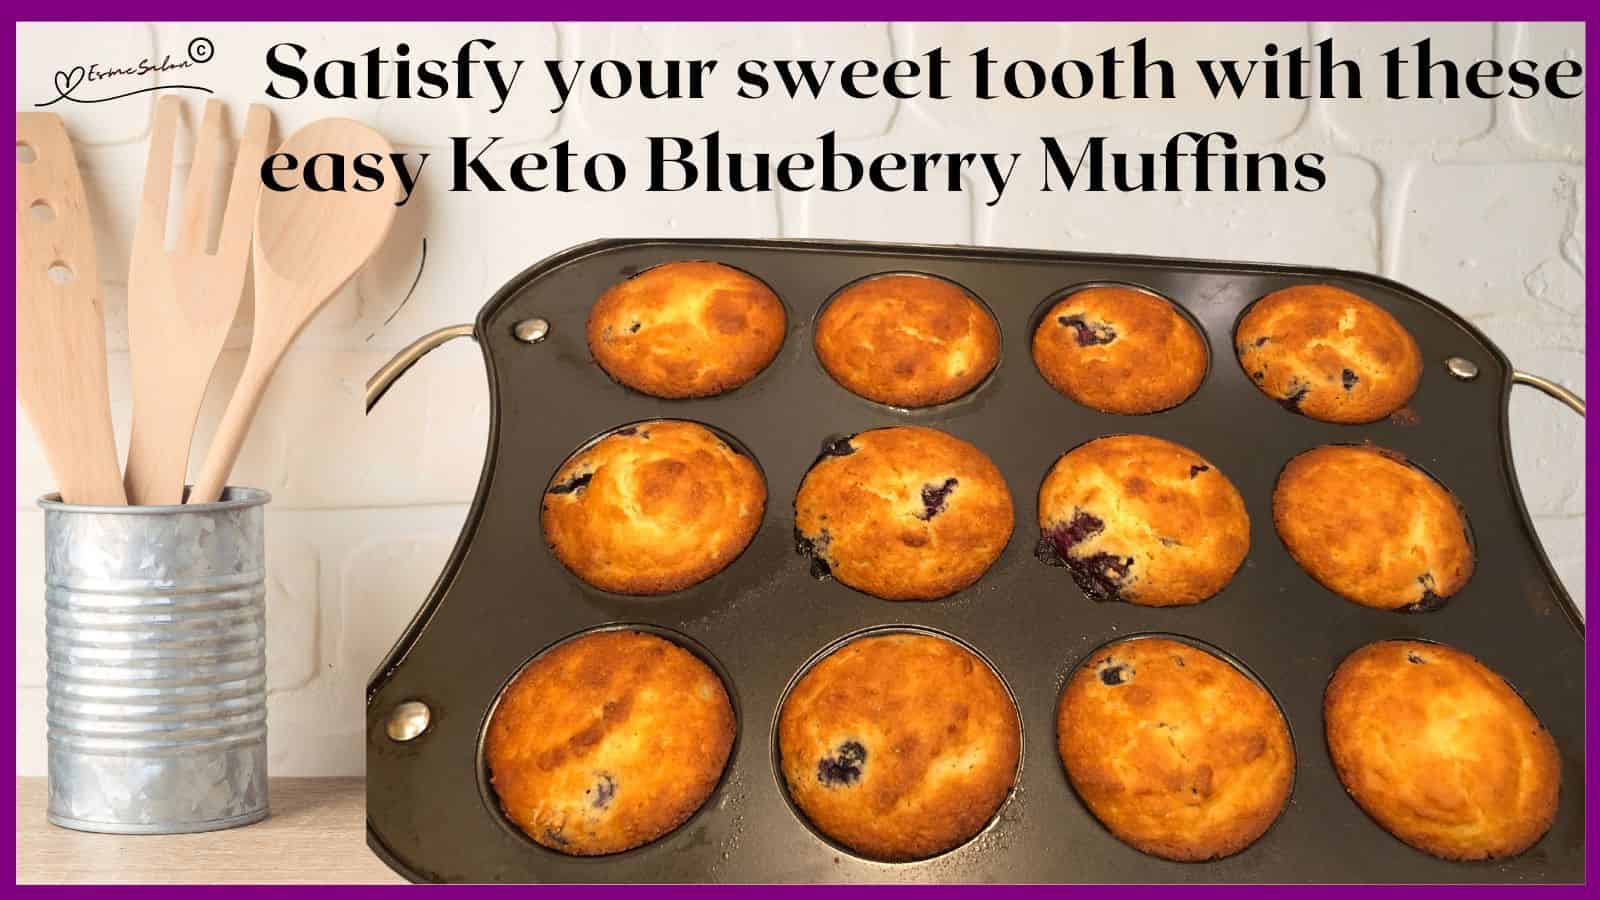 an image of Keto Blueberry Muffins baked and in muffin pan